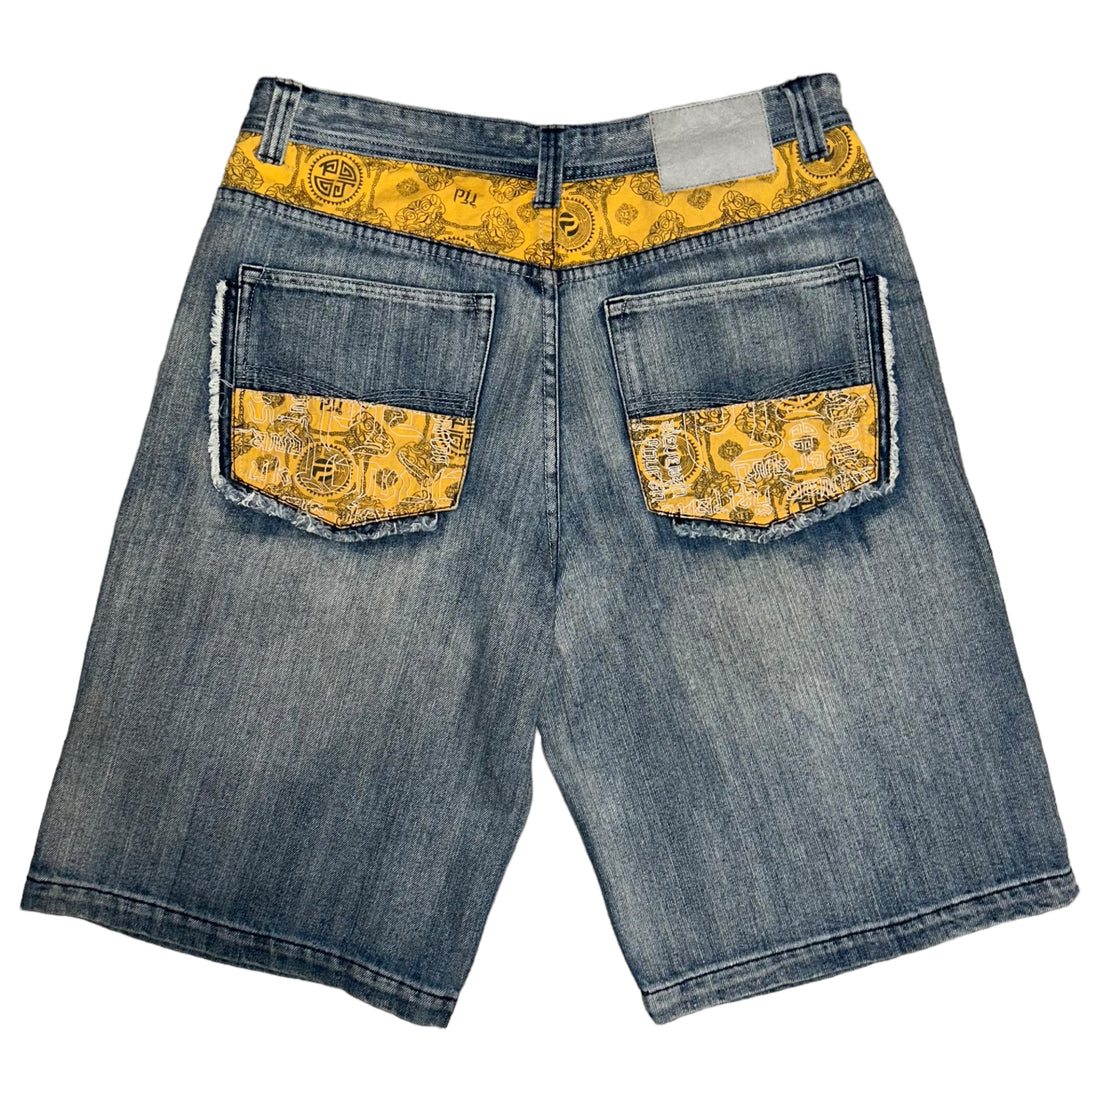 Baggy Shorts Pepe Jeans (34 USA / L)